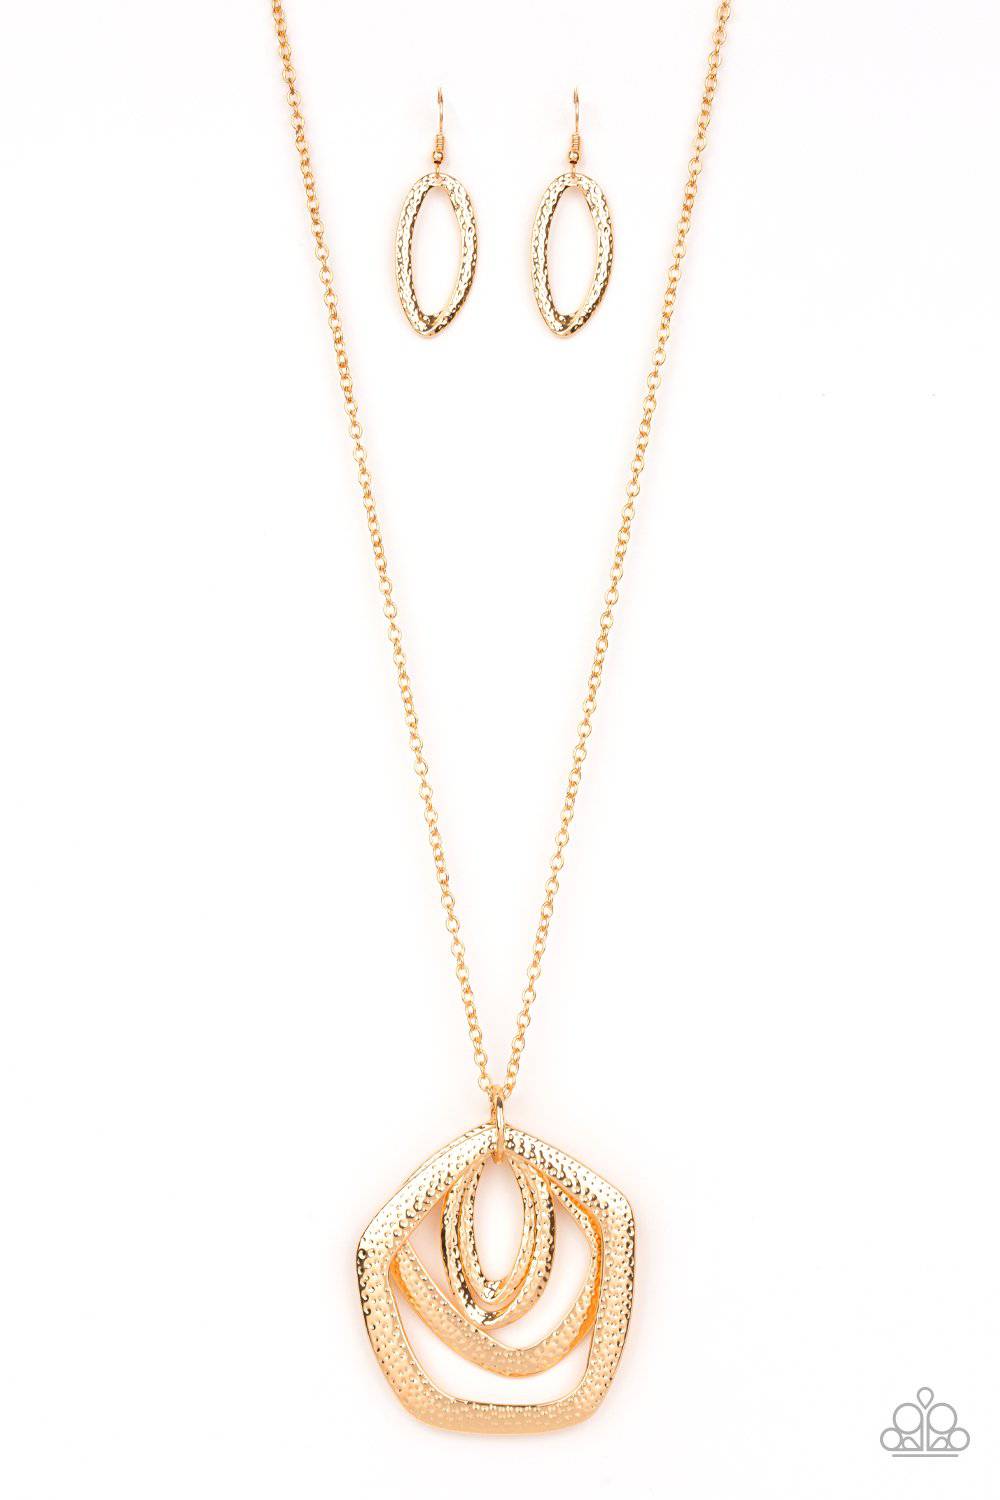 A79 - Urban Artisan Gold Necklace by Paparazzi Accessories on Fancy5Fashion.com